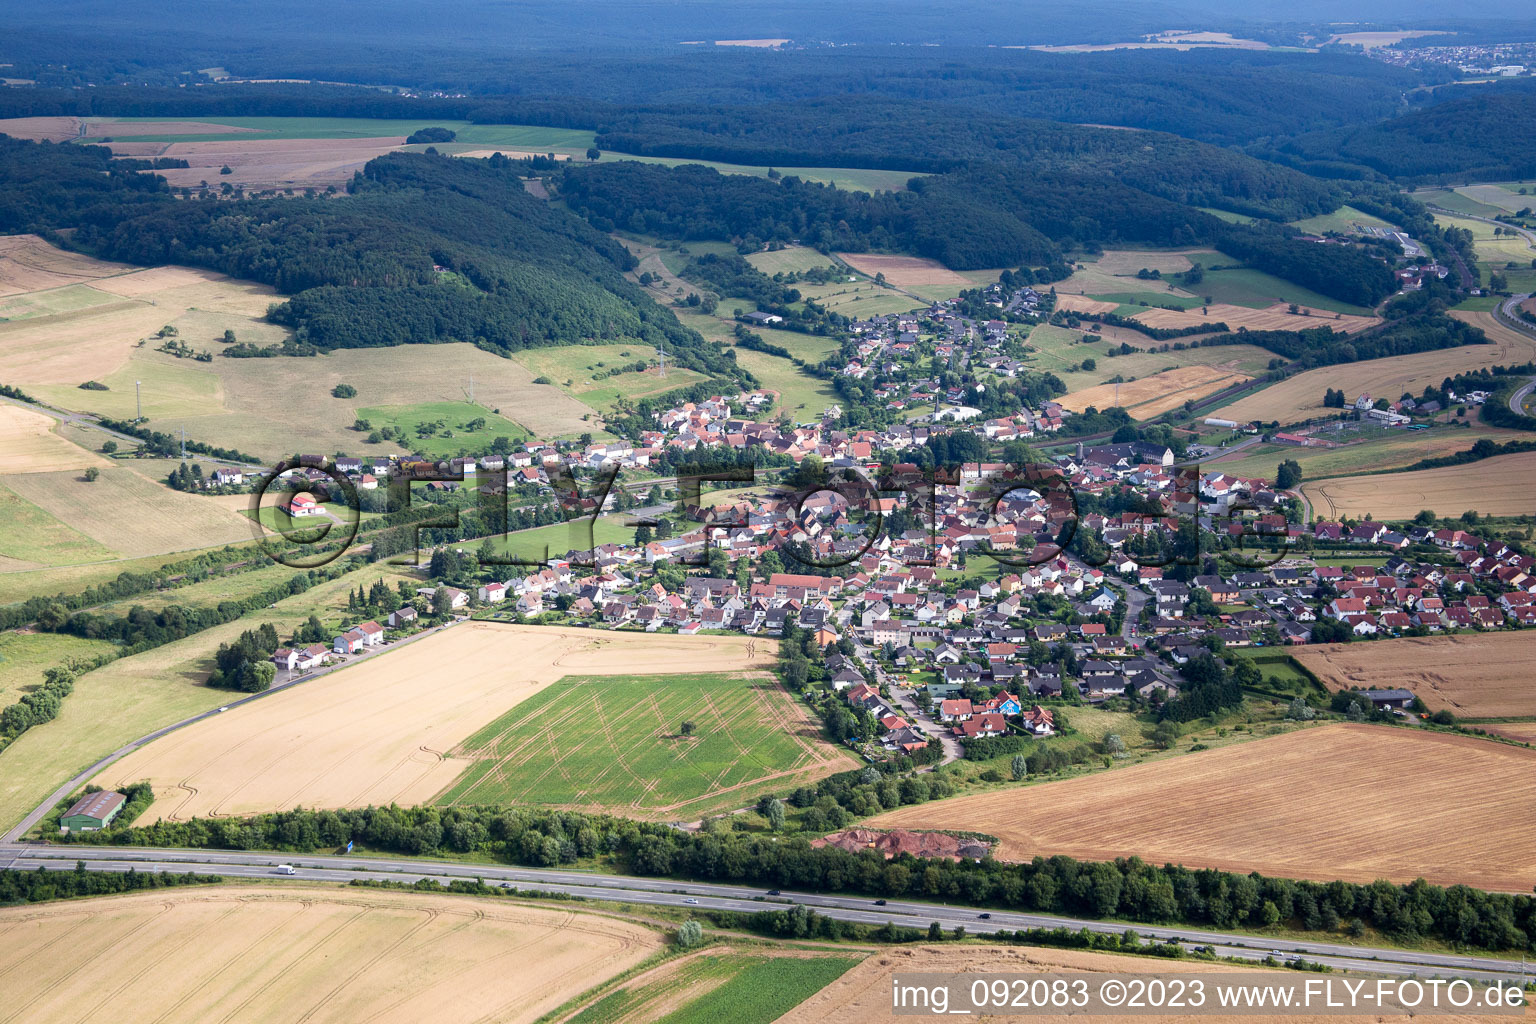 Aerial view of Village - view on the edge of agricultural fields and farmland in Muenchweiler an der Alsenz in the state Rhineland-Palatinate, Germany